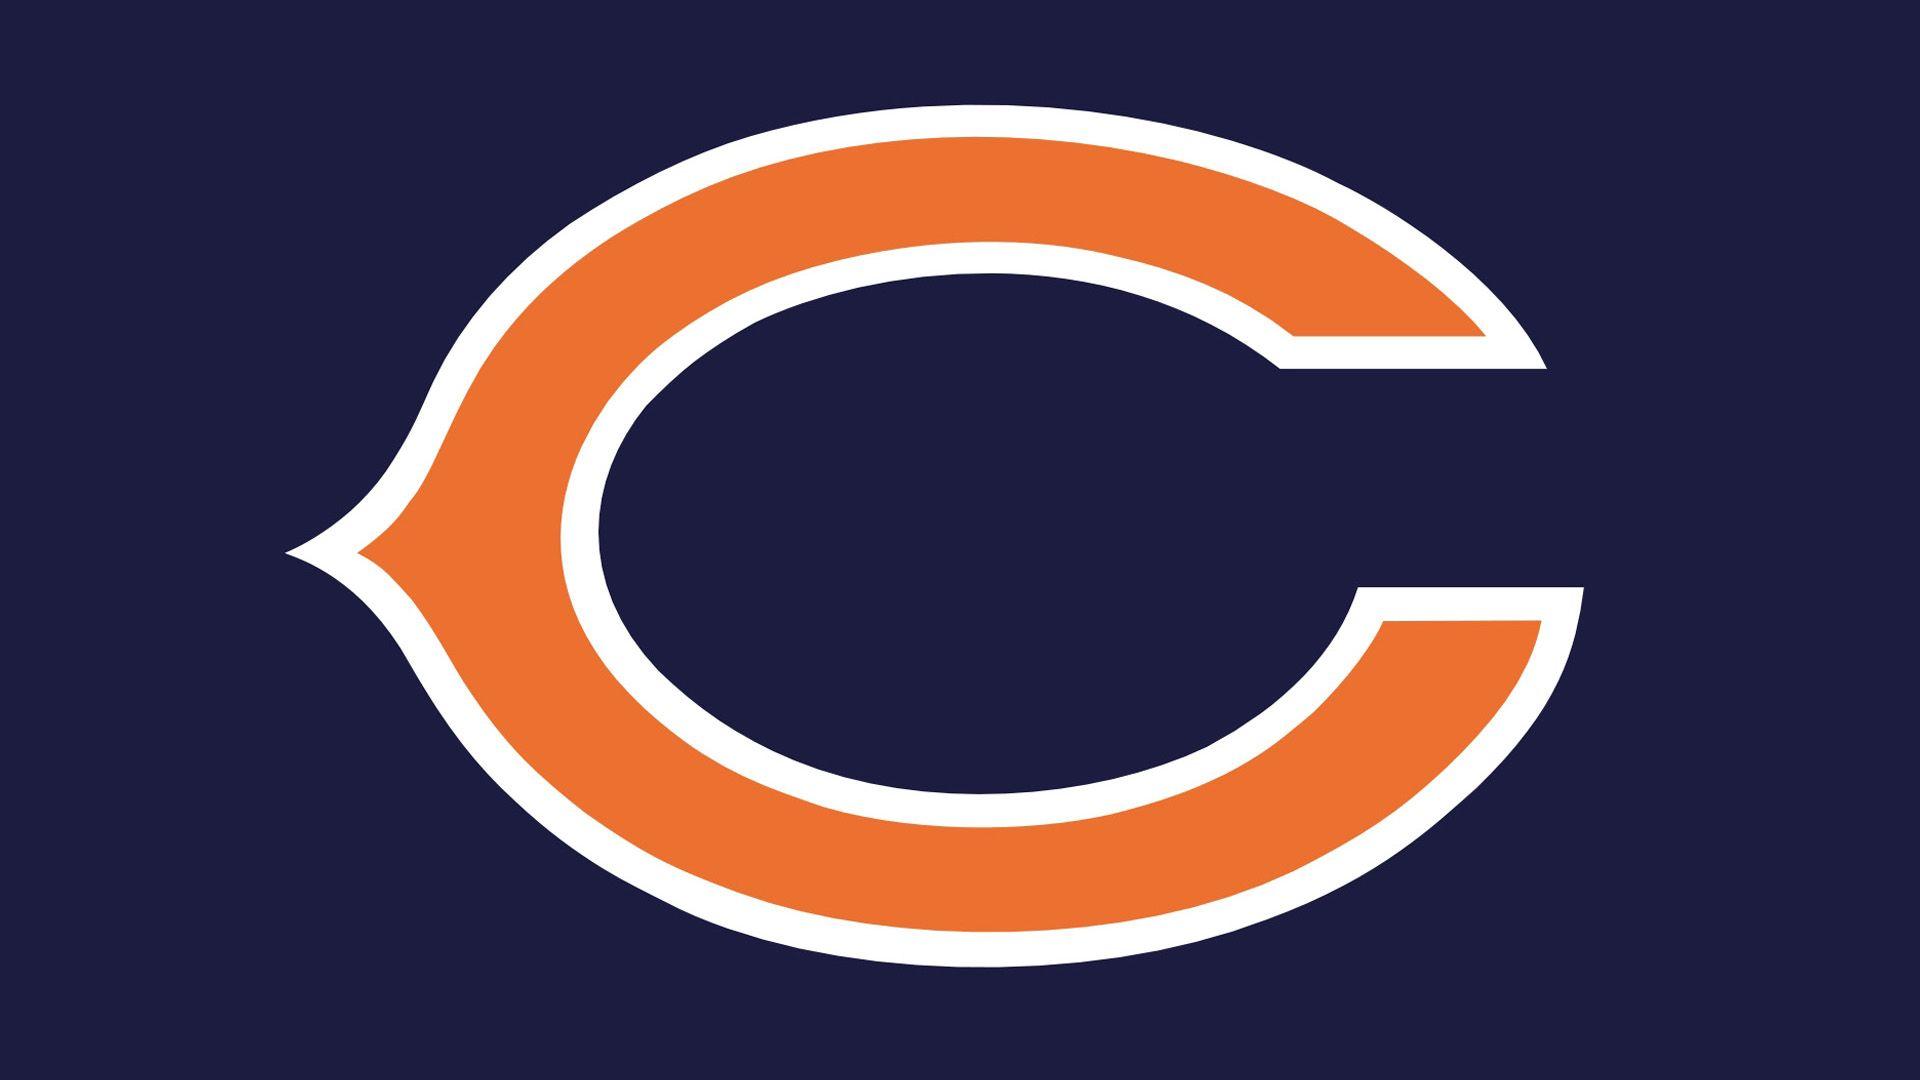 Chicago Bears Logo Wallpapers - Wallpaper Cave